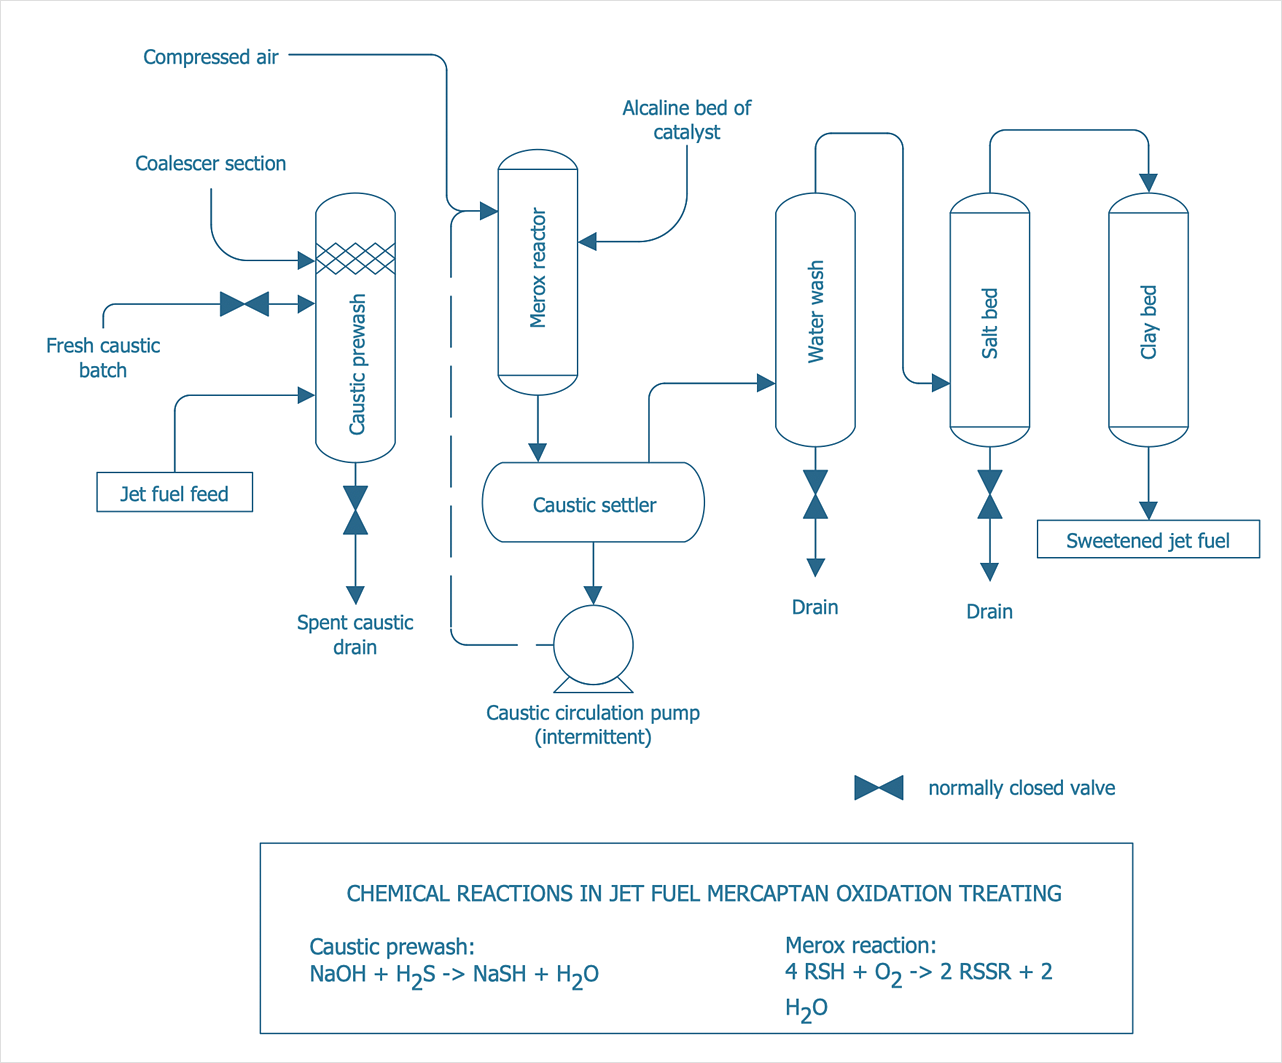 How to Draw a Chemical Process Flow Diagram | Chemical and Process